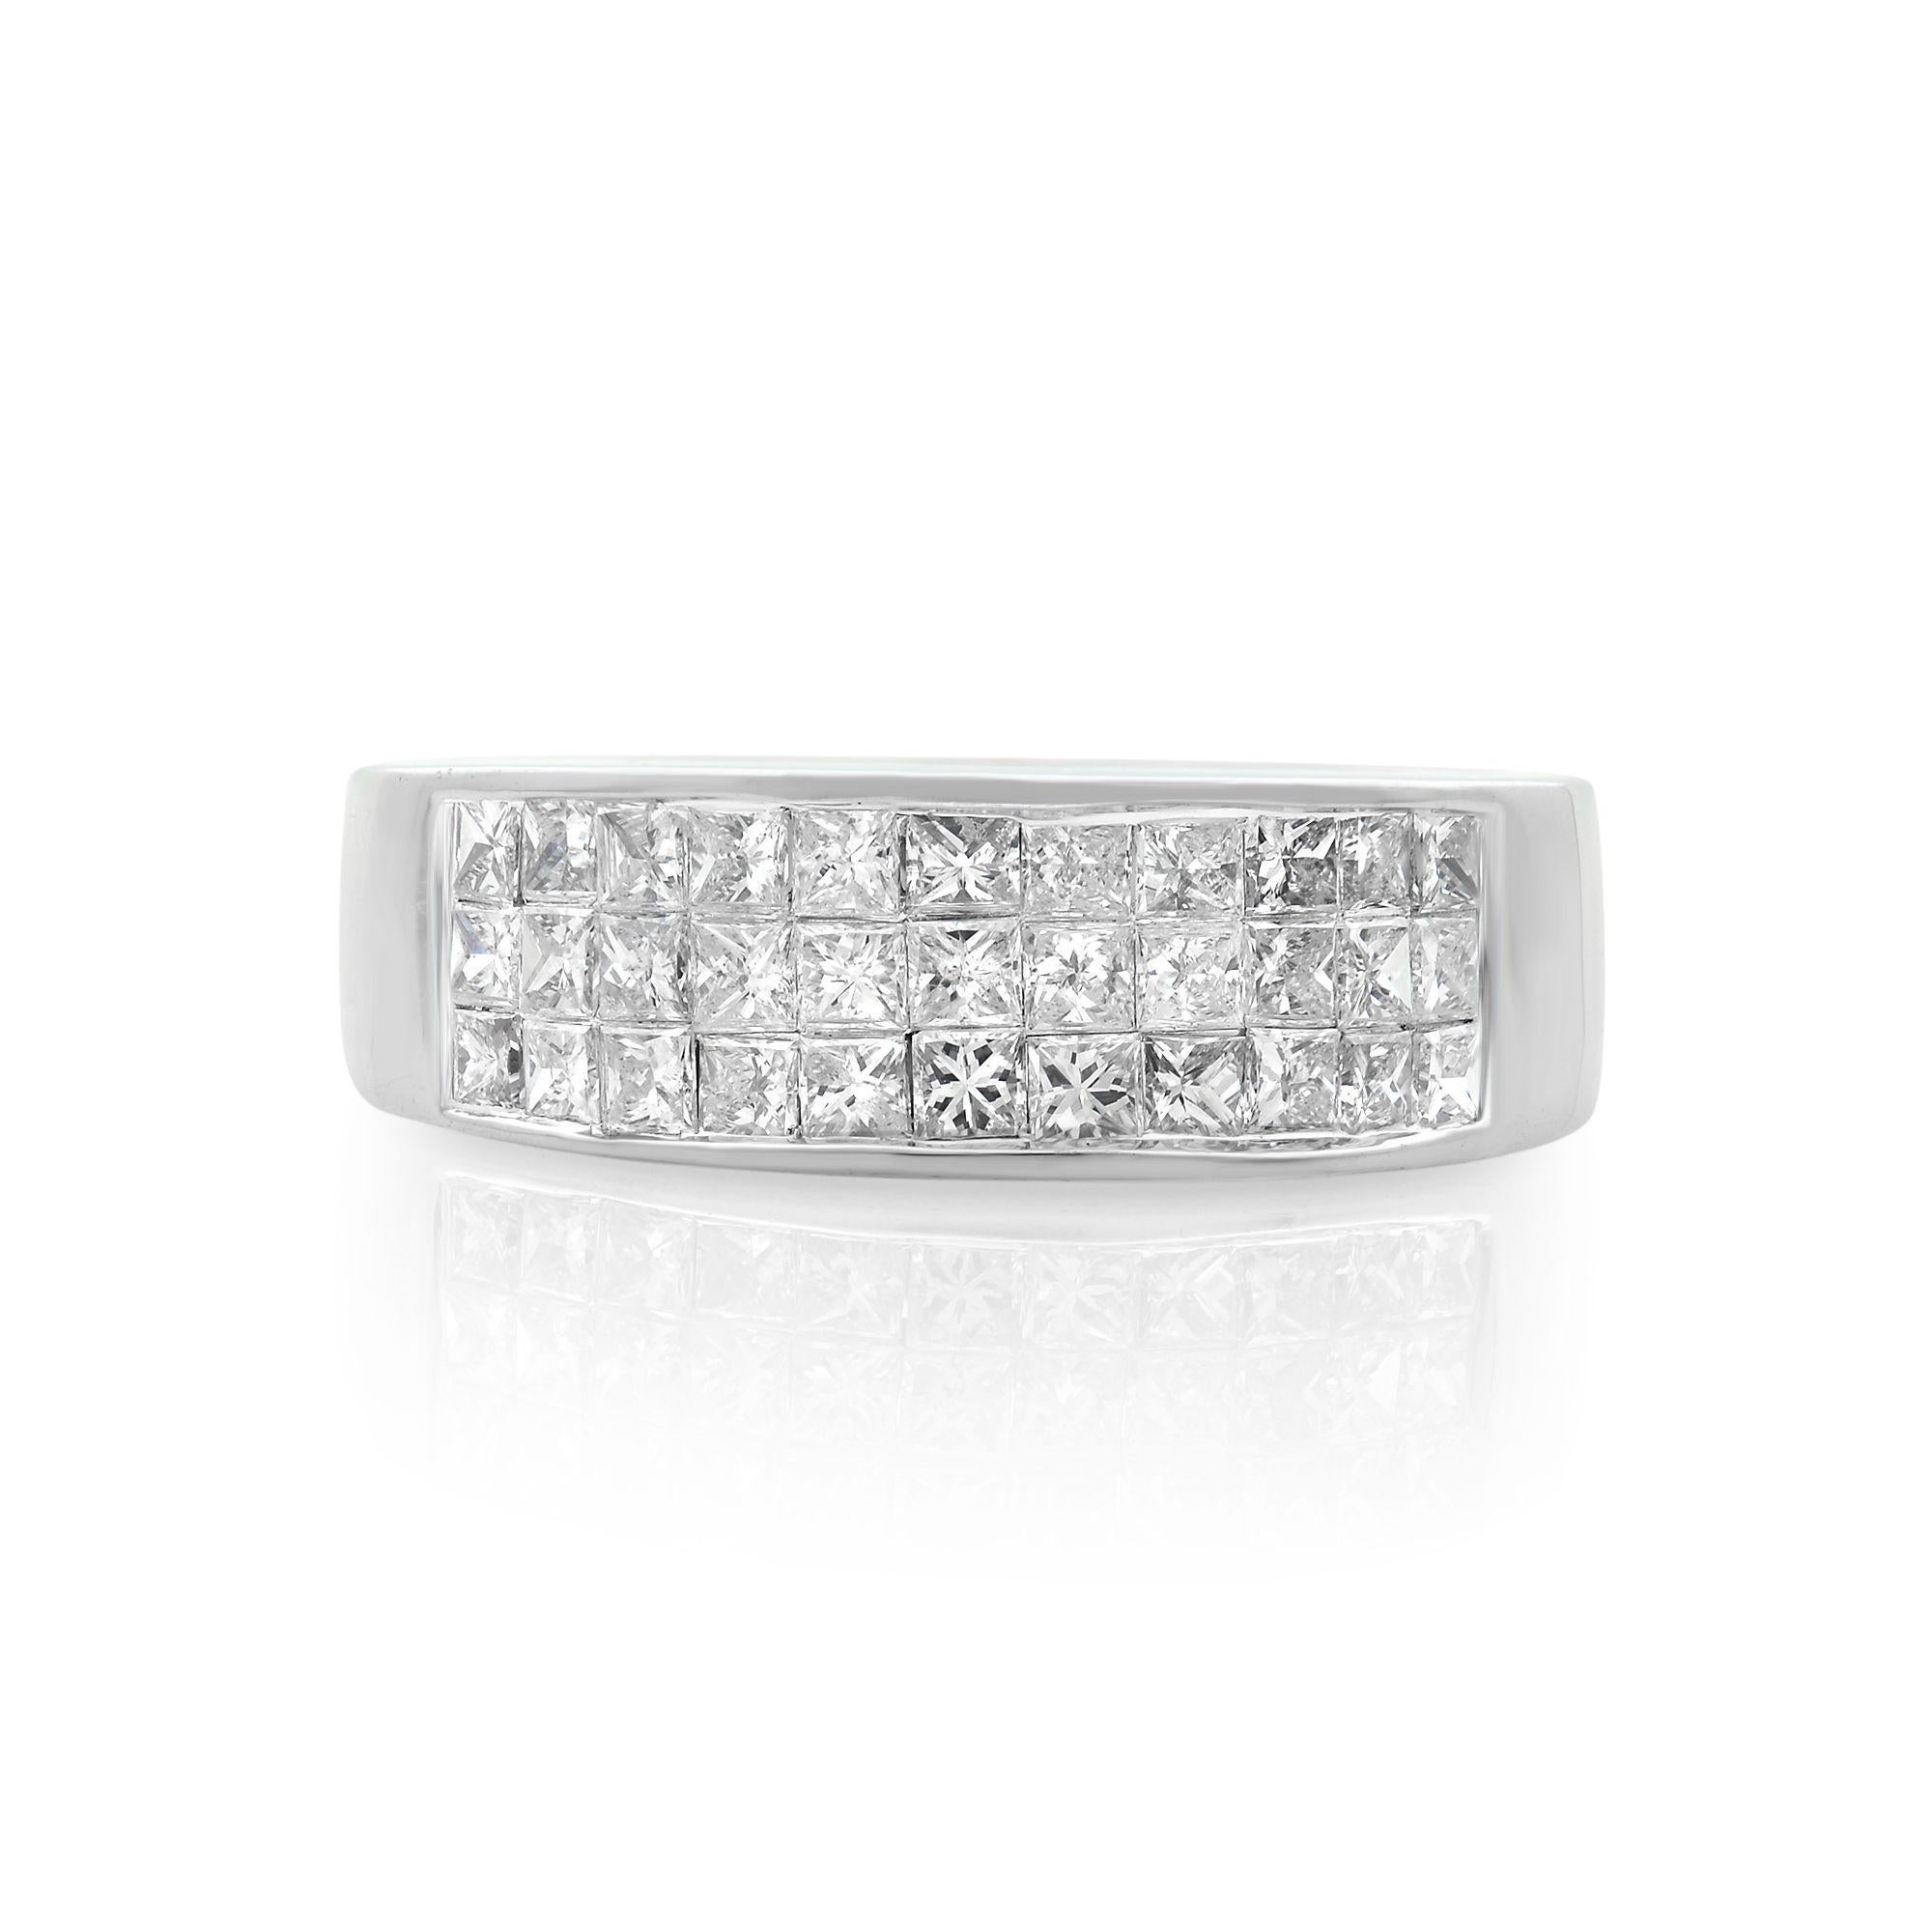 Modern ladies thick band ring crafted in 14k white gold with 33 princess cut diamonds in invisible setting.  
Total diamond carat weight : 1.00 with color H and clarity SI2. Ring width: 6.5mm. Ring size: 7.5. New condition. Comes in our jewelry